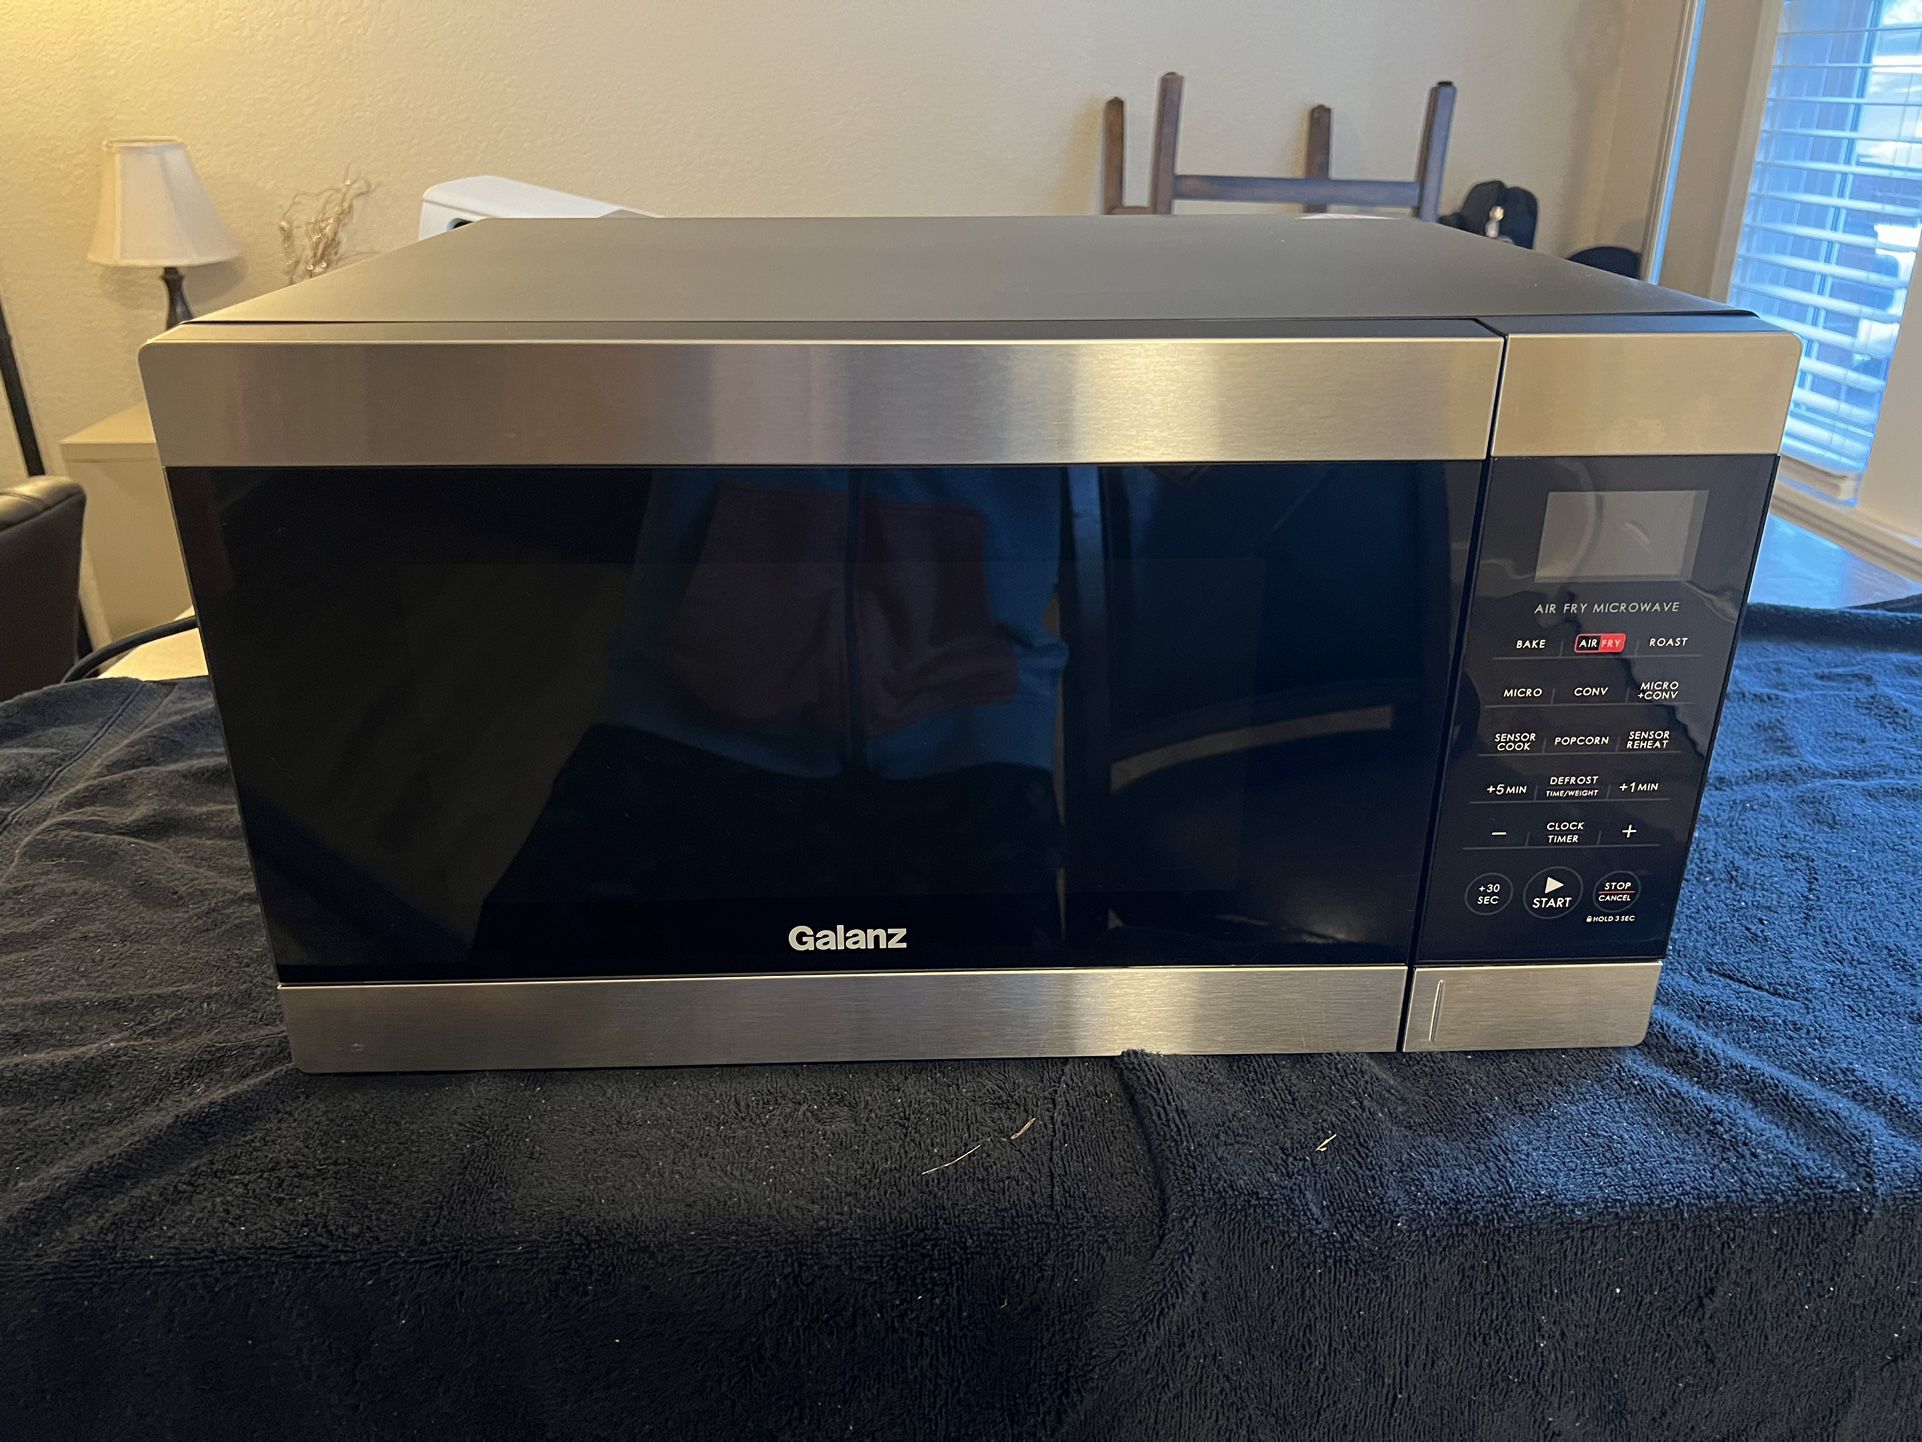 Galanz- Stainless Steel Electric Microwave Oven!